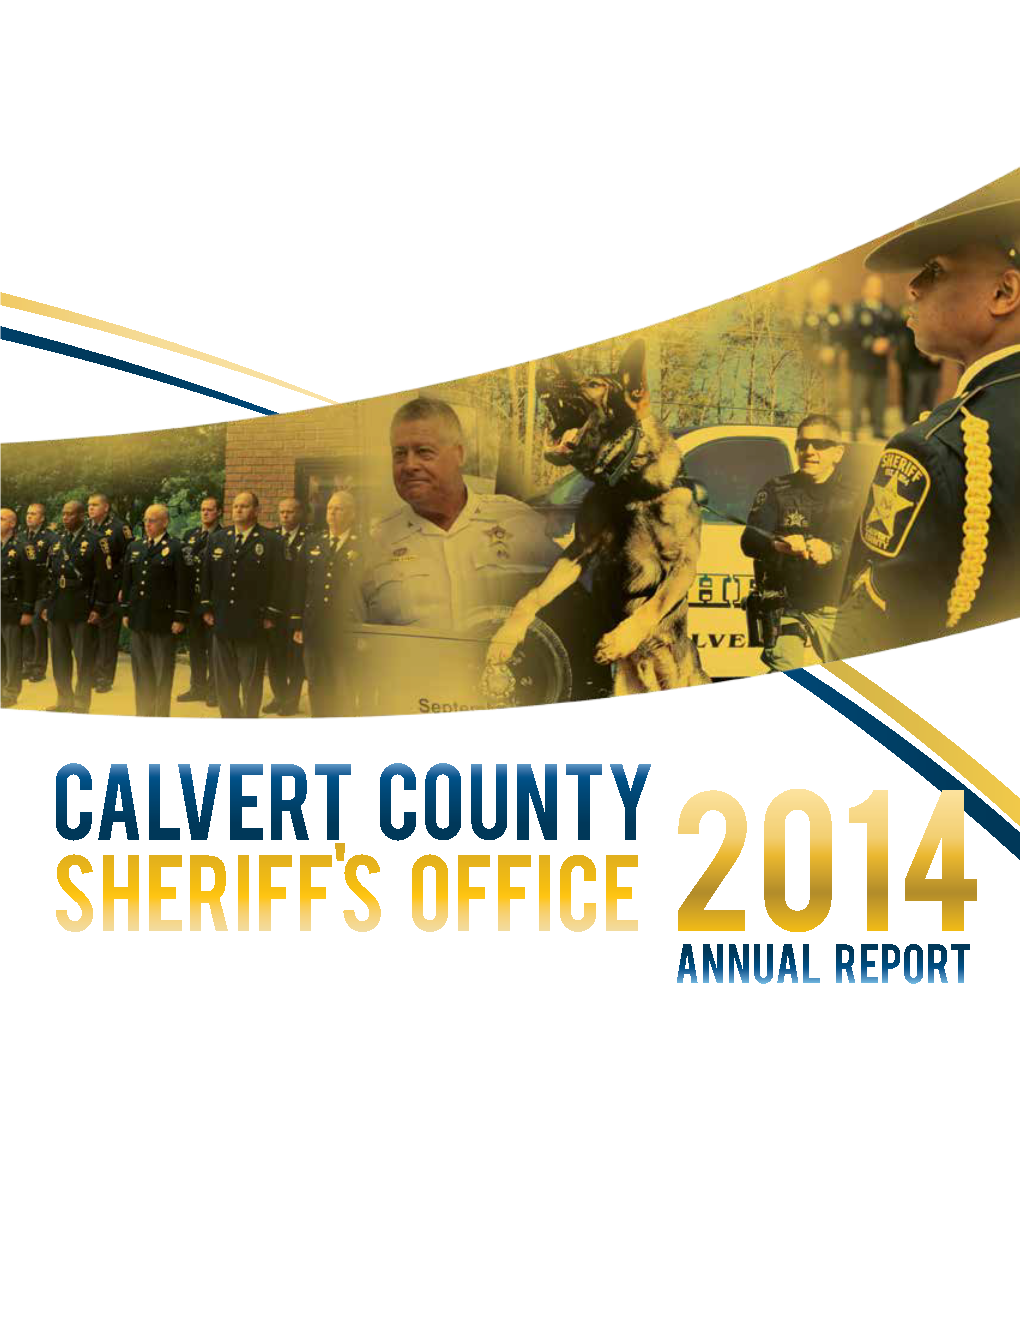 Calvert County Sheriff's Office 2014 Annual Report Table of Contents